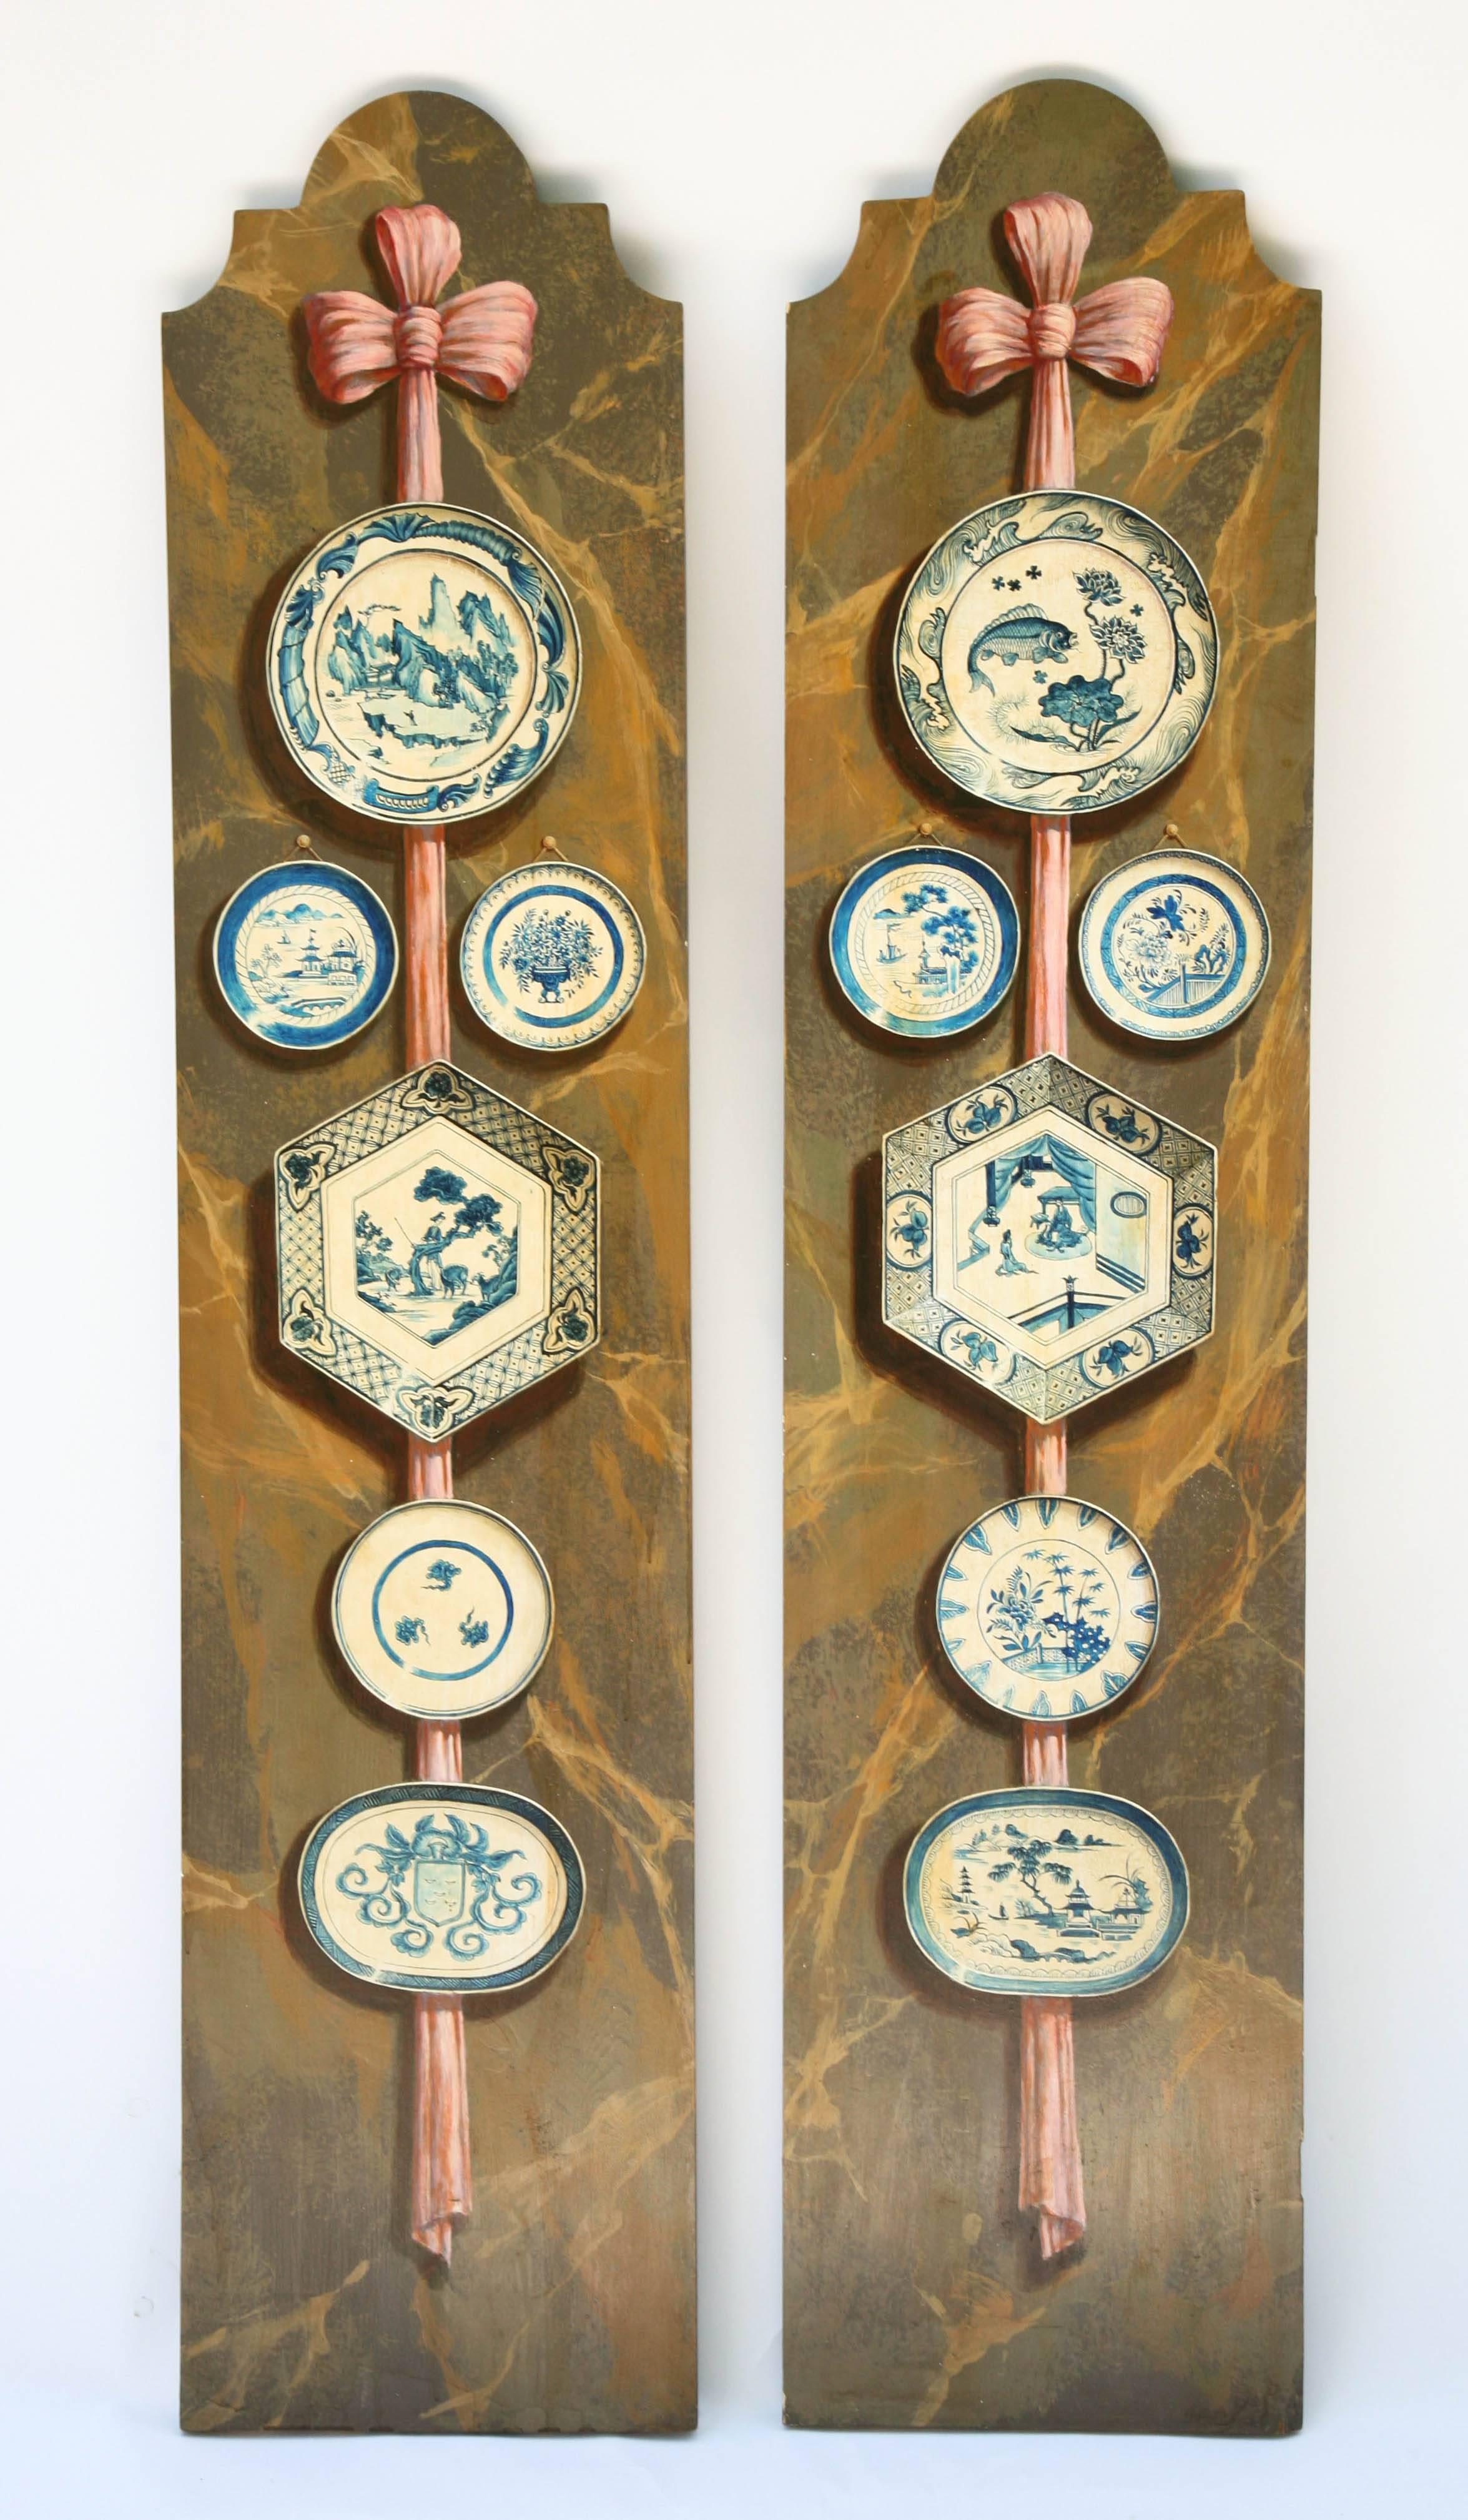 Pair of wooden panels, formerly cabinet doors, having rectangular forms with shaped pediments; each exquisitely hand-painted with a collection of blue and white platters and charges, hung from a ribbon, against a marbleized background.

Stock ID: